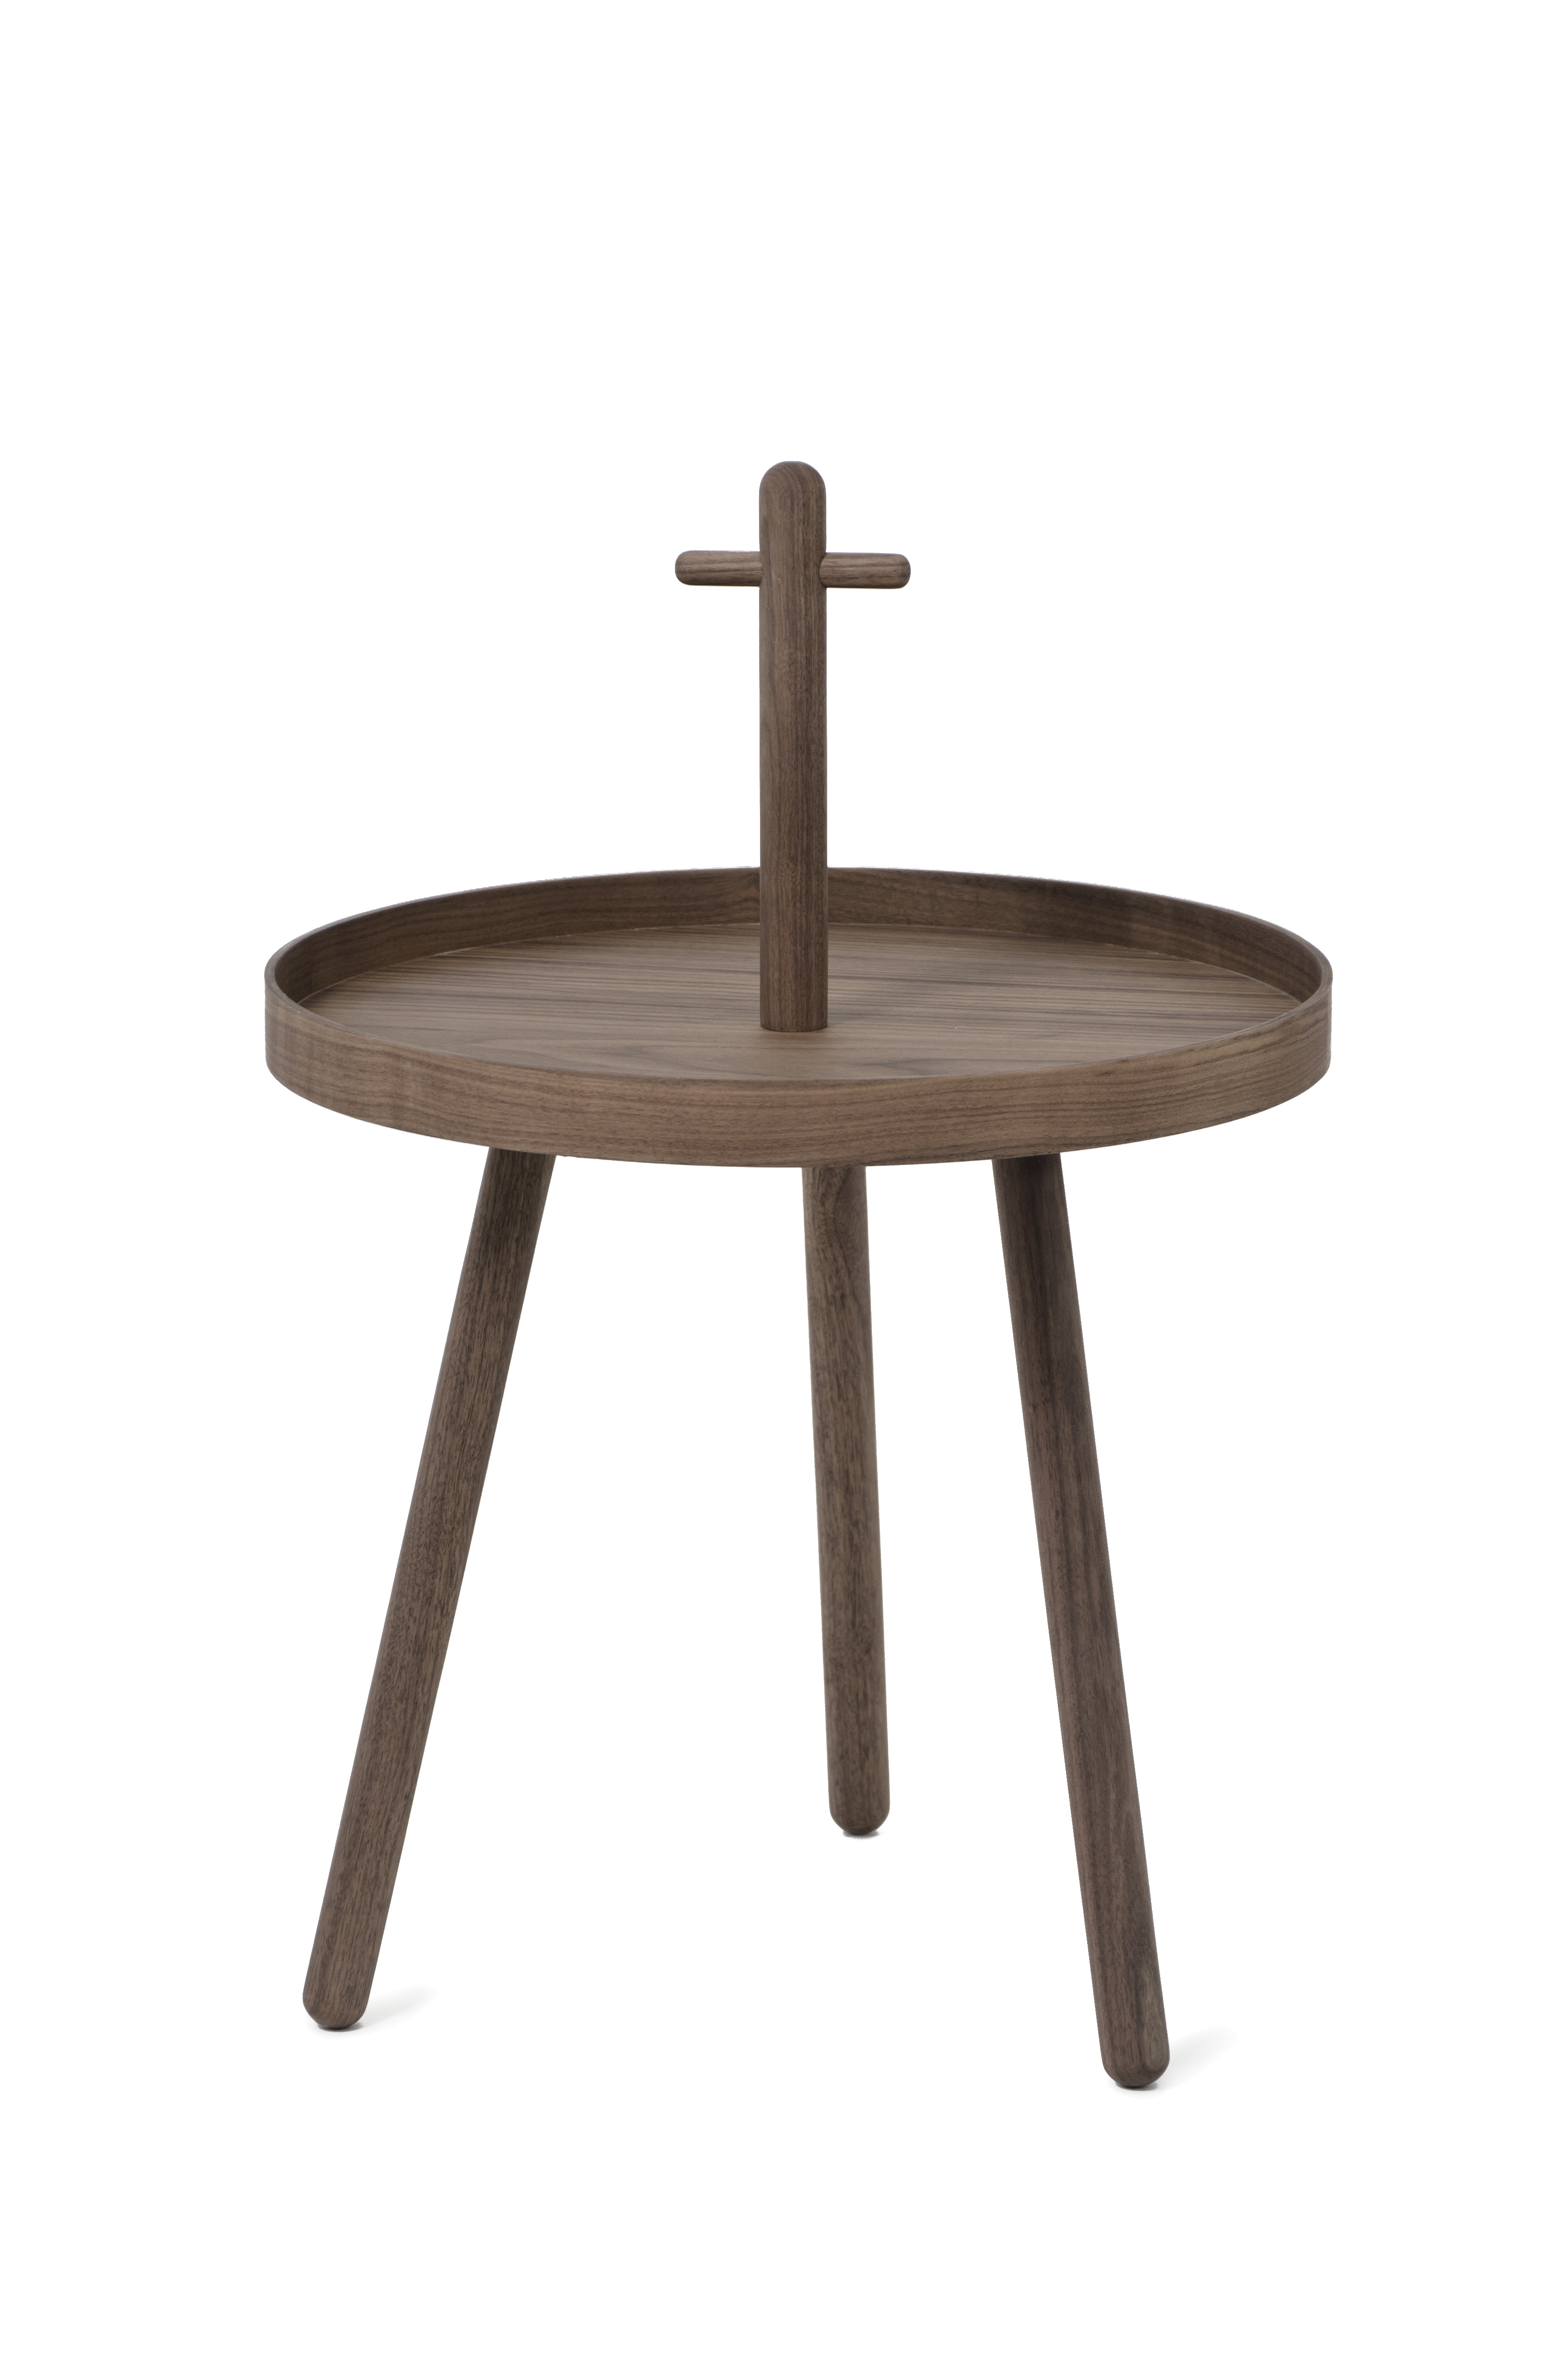 Wireworks Pick Me Up Table in Walnut